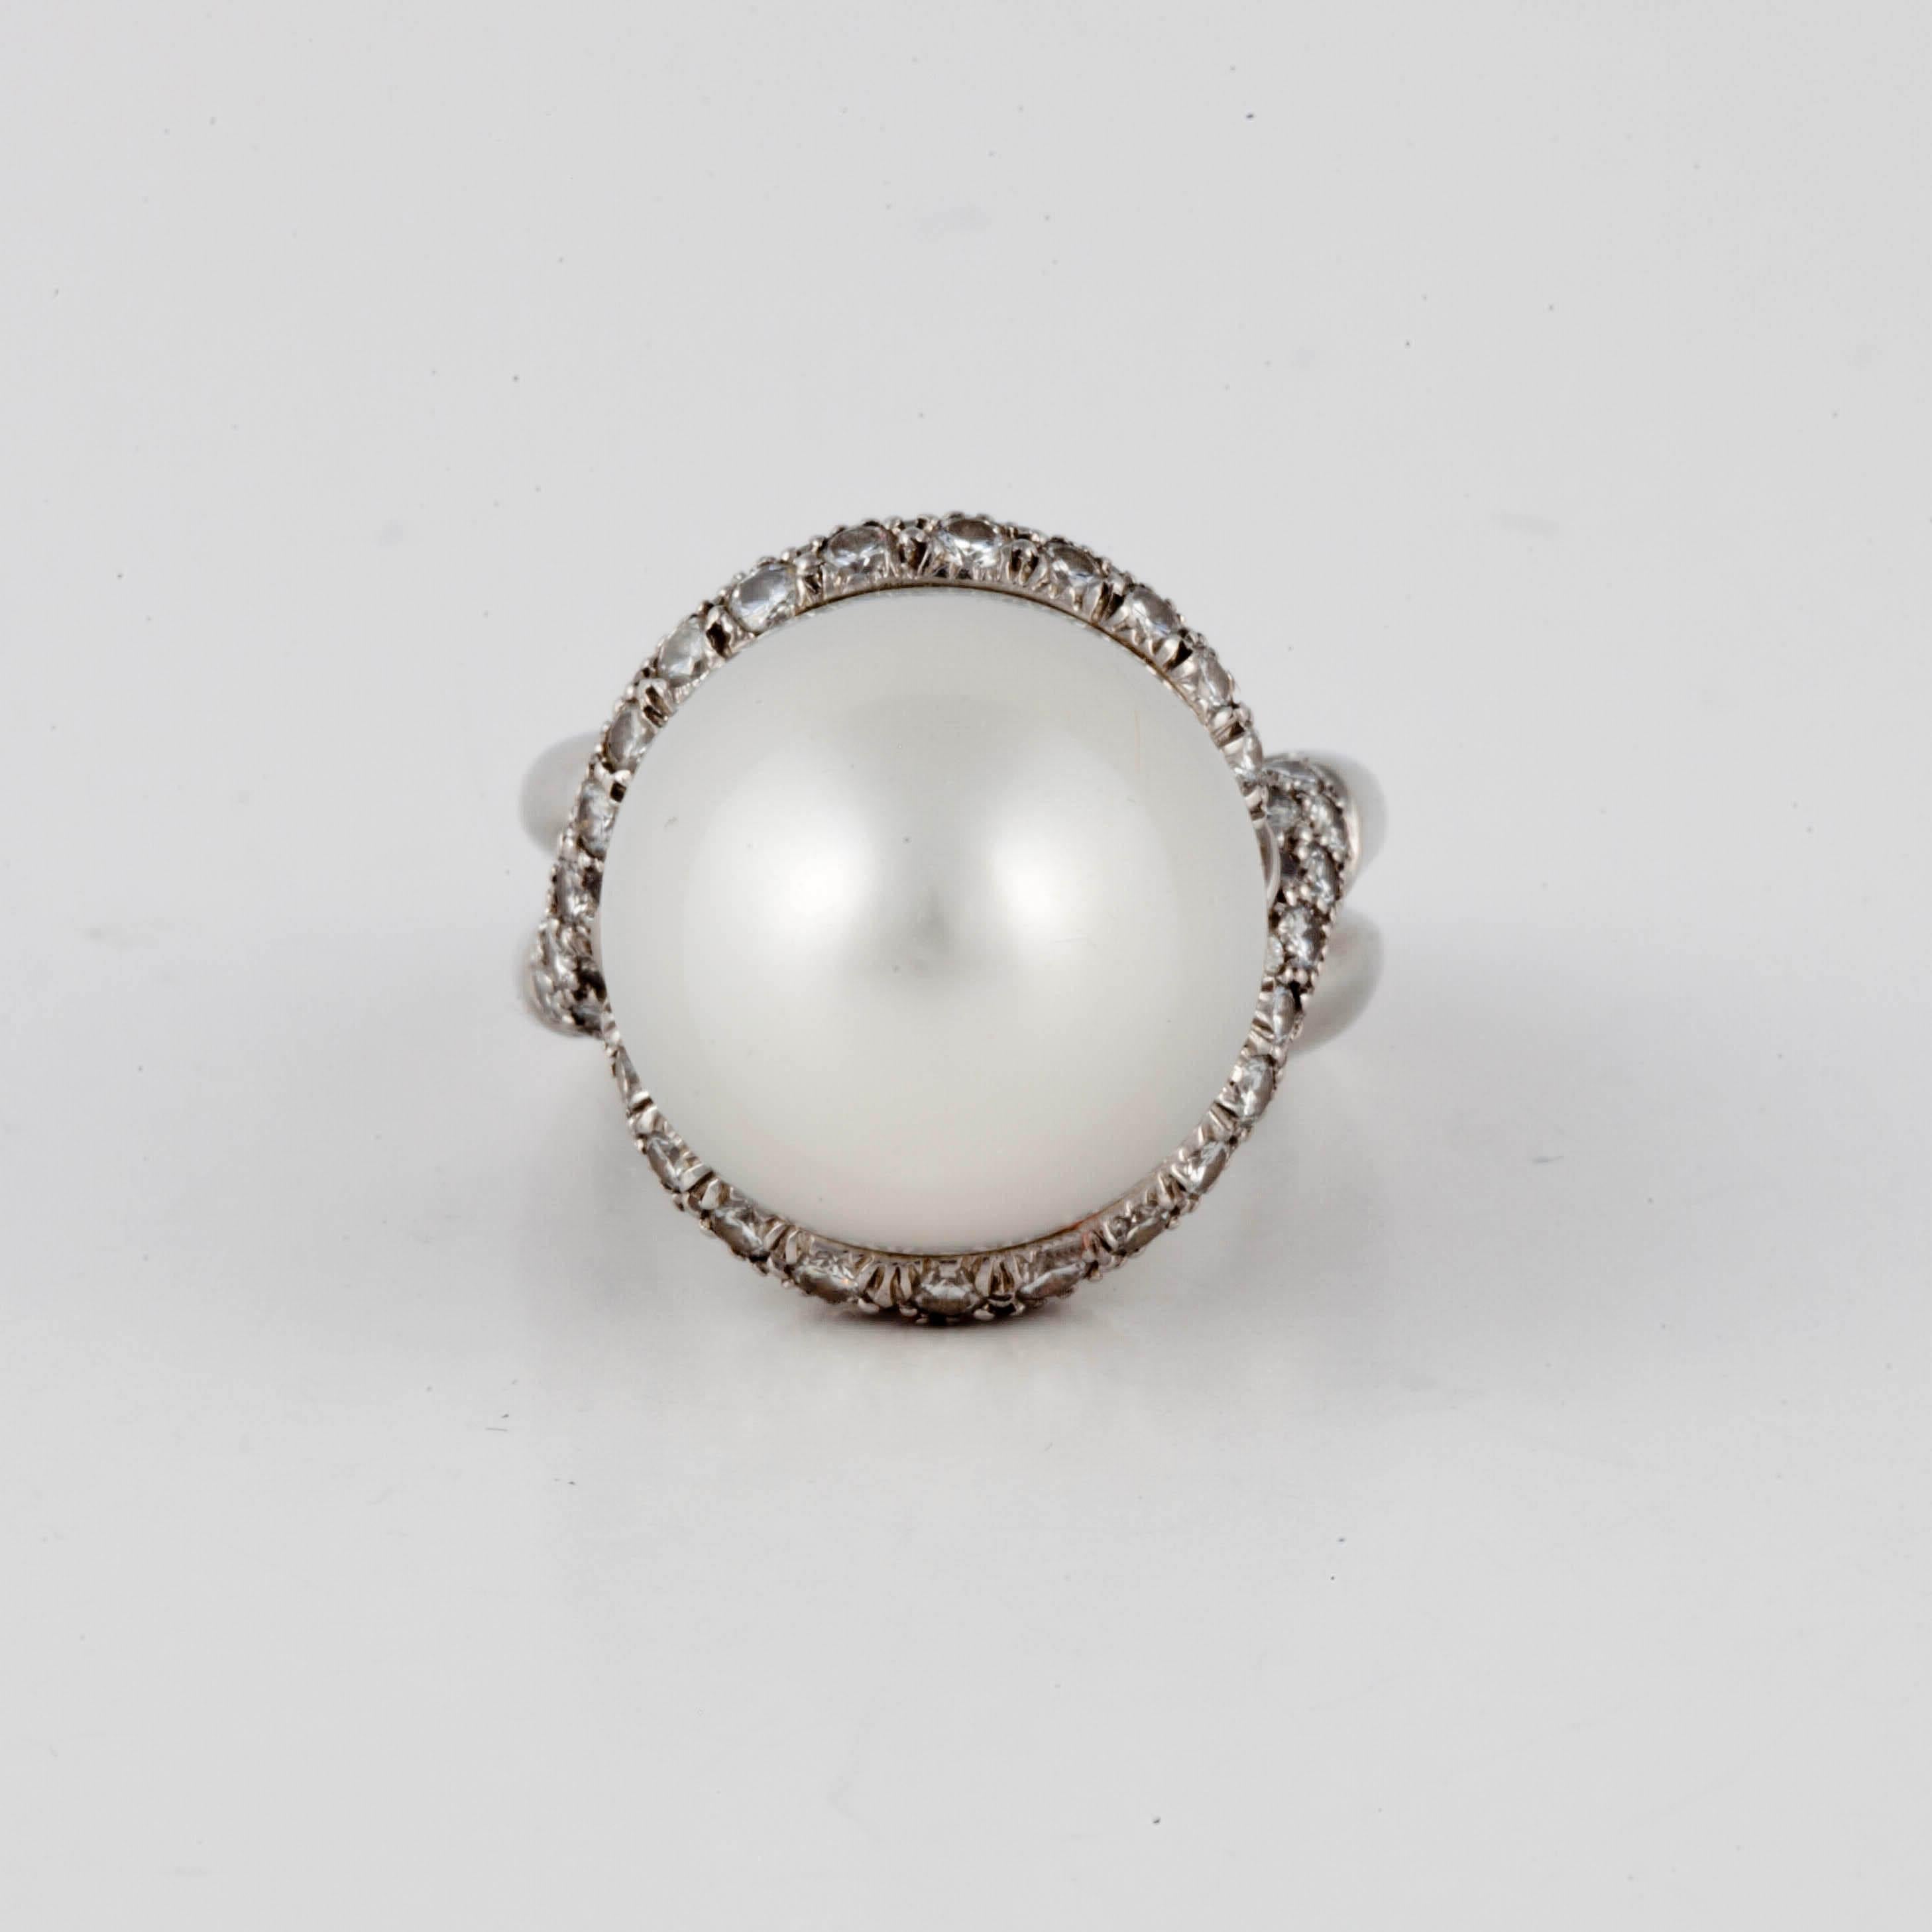 Henry Dunay platinum ring featuring a large baroque pearl surrounded by diamonds.  There are 82 round diamonds surrounding the pearl which total 3.28 carats; G-H color and VS1-2 clarity.  The ring is a size 6 with a butterfly insert.  Measures 3/4